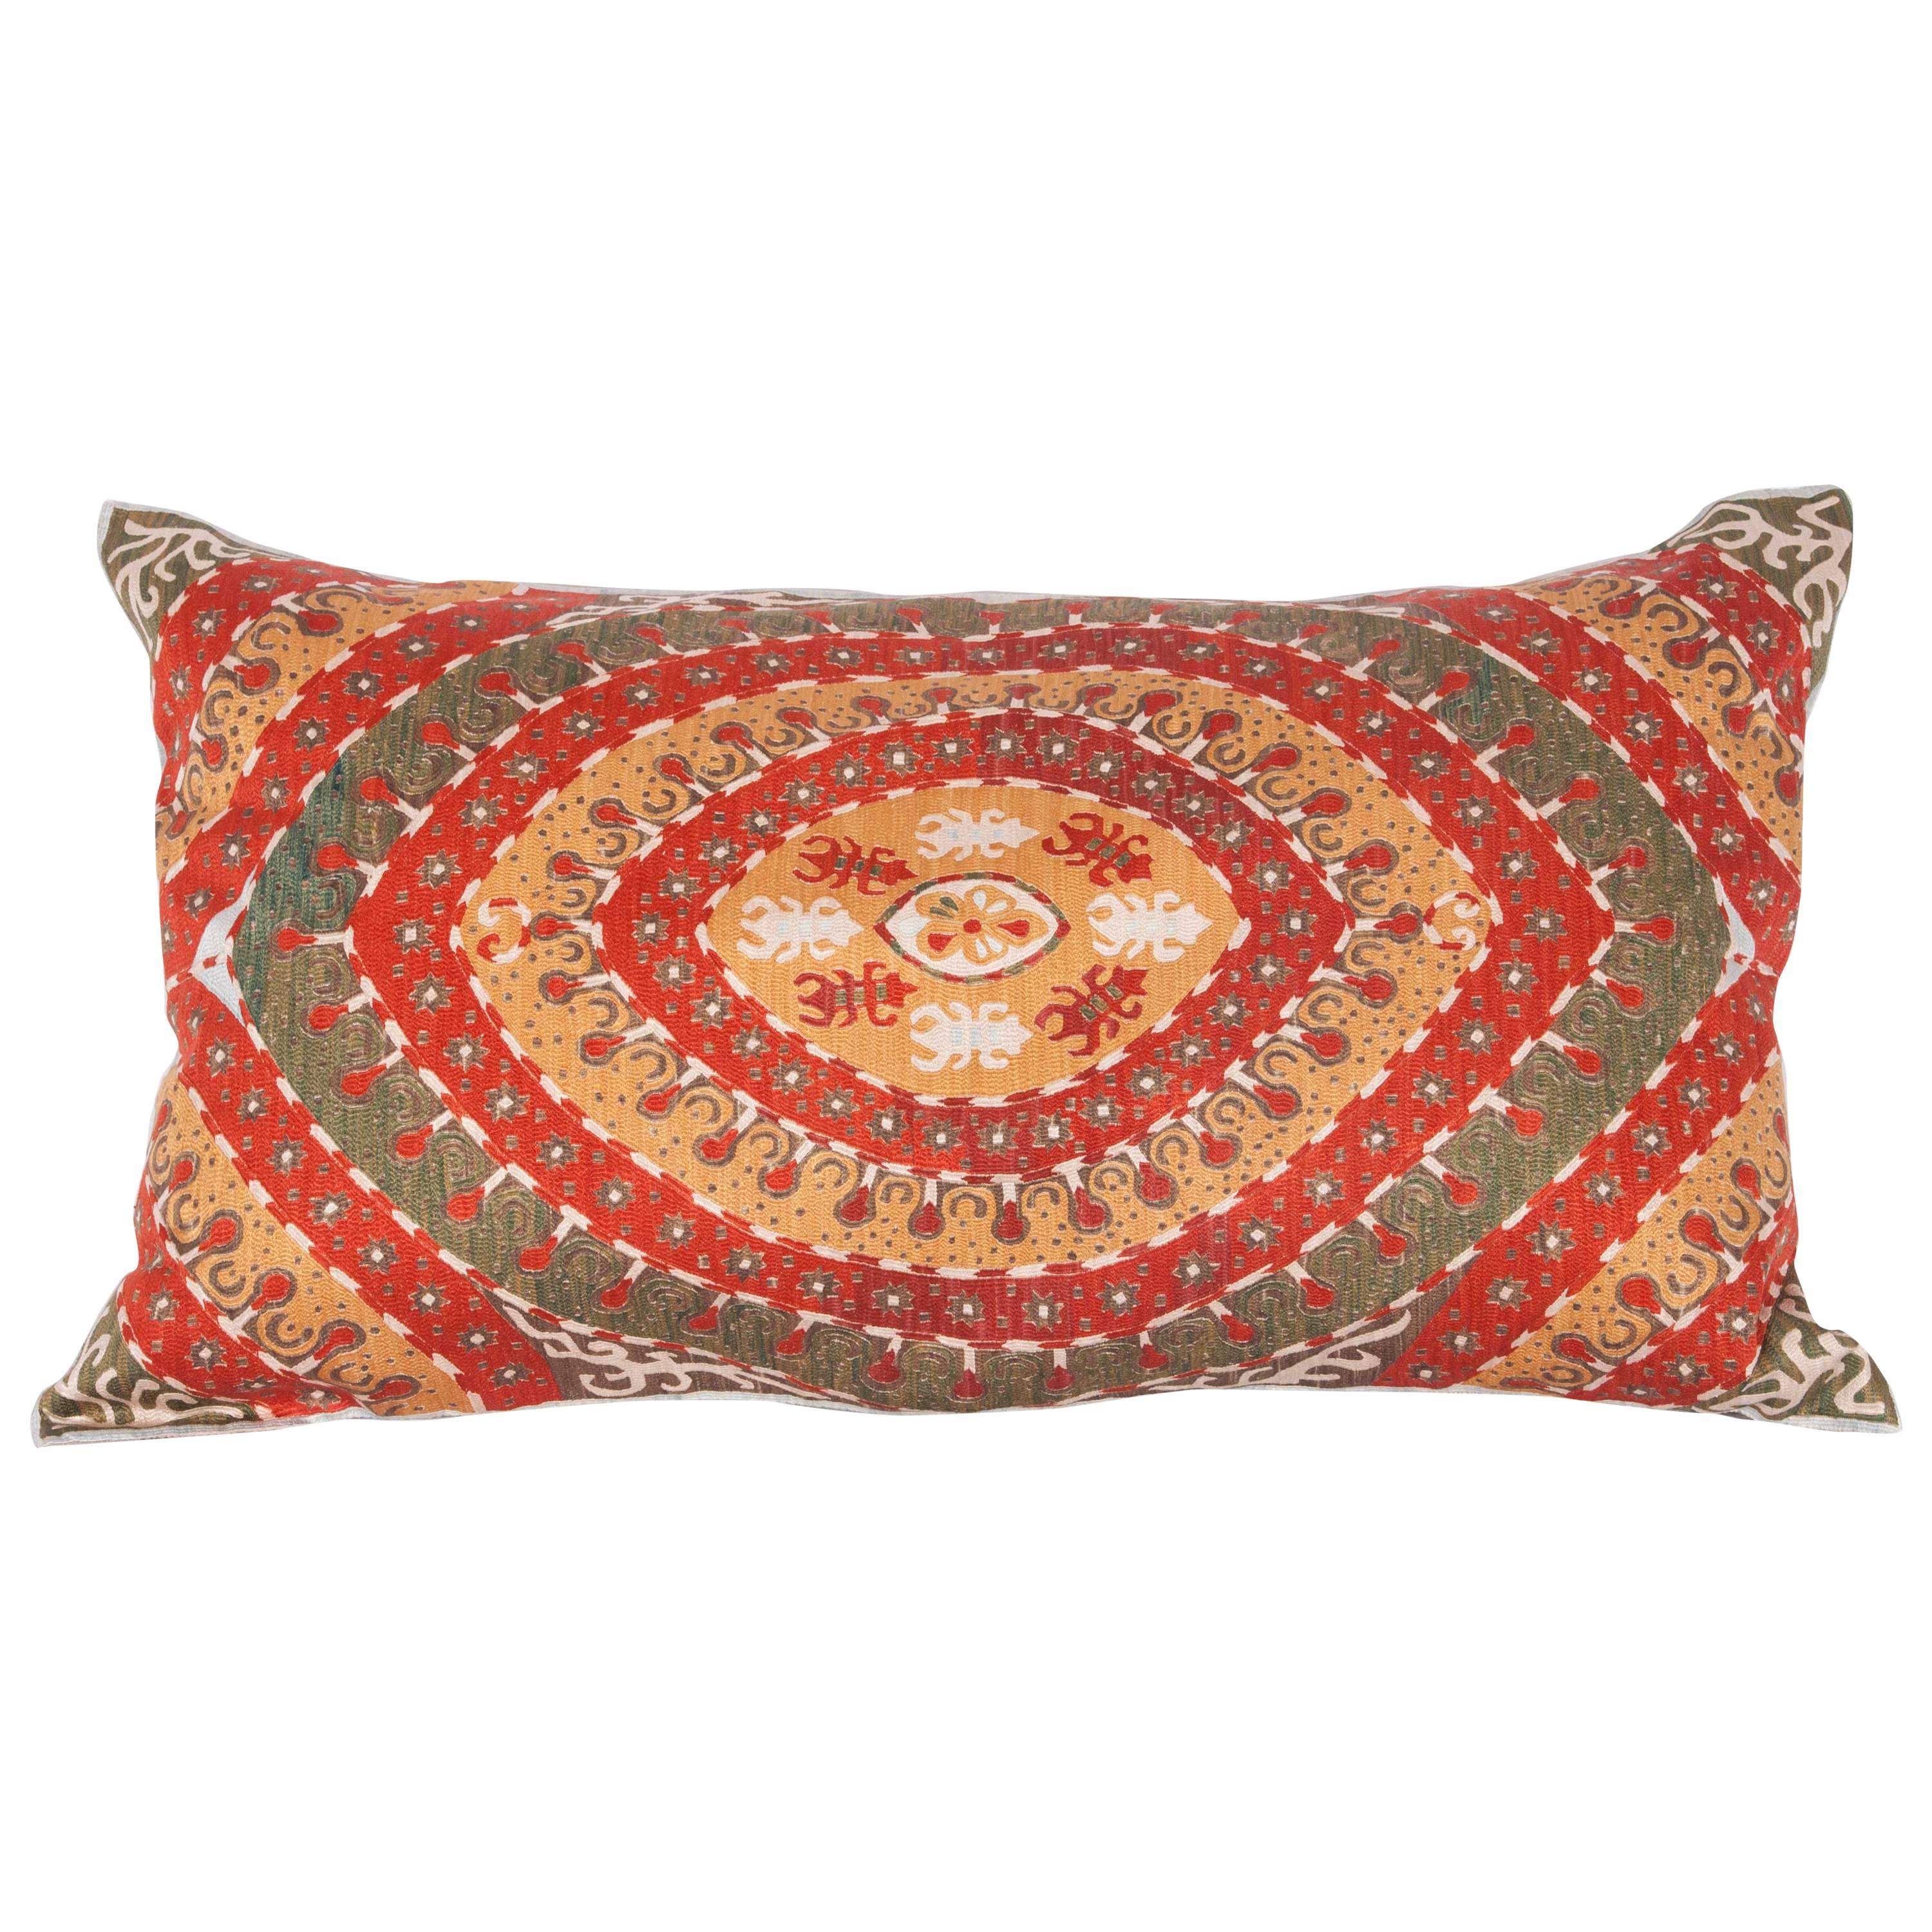 Contemporary Silk Hand Embroidered Pillow from Armenia